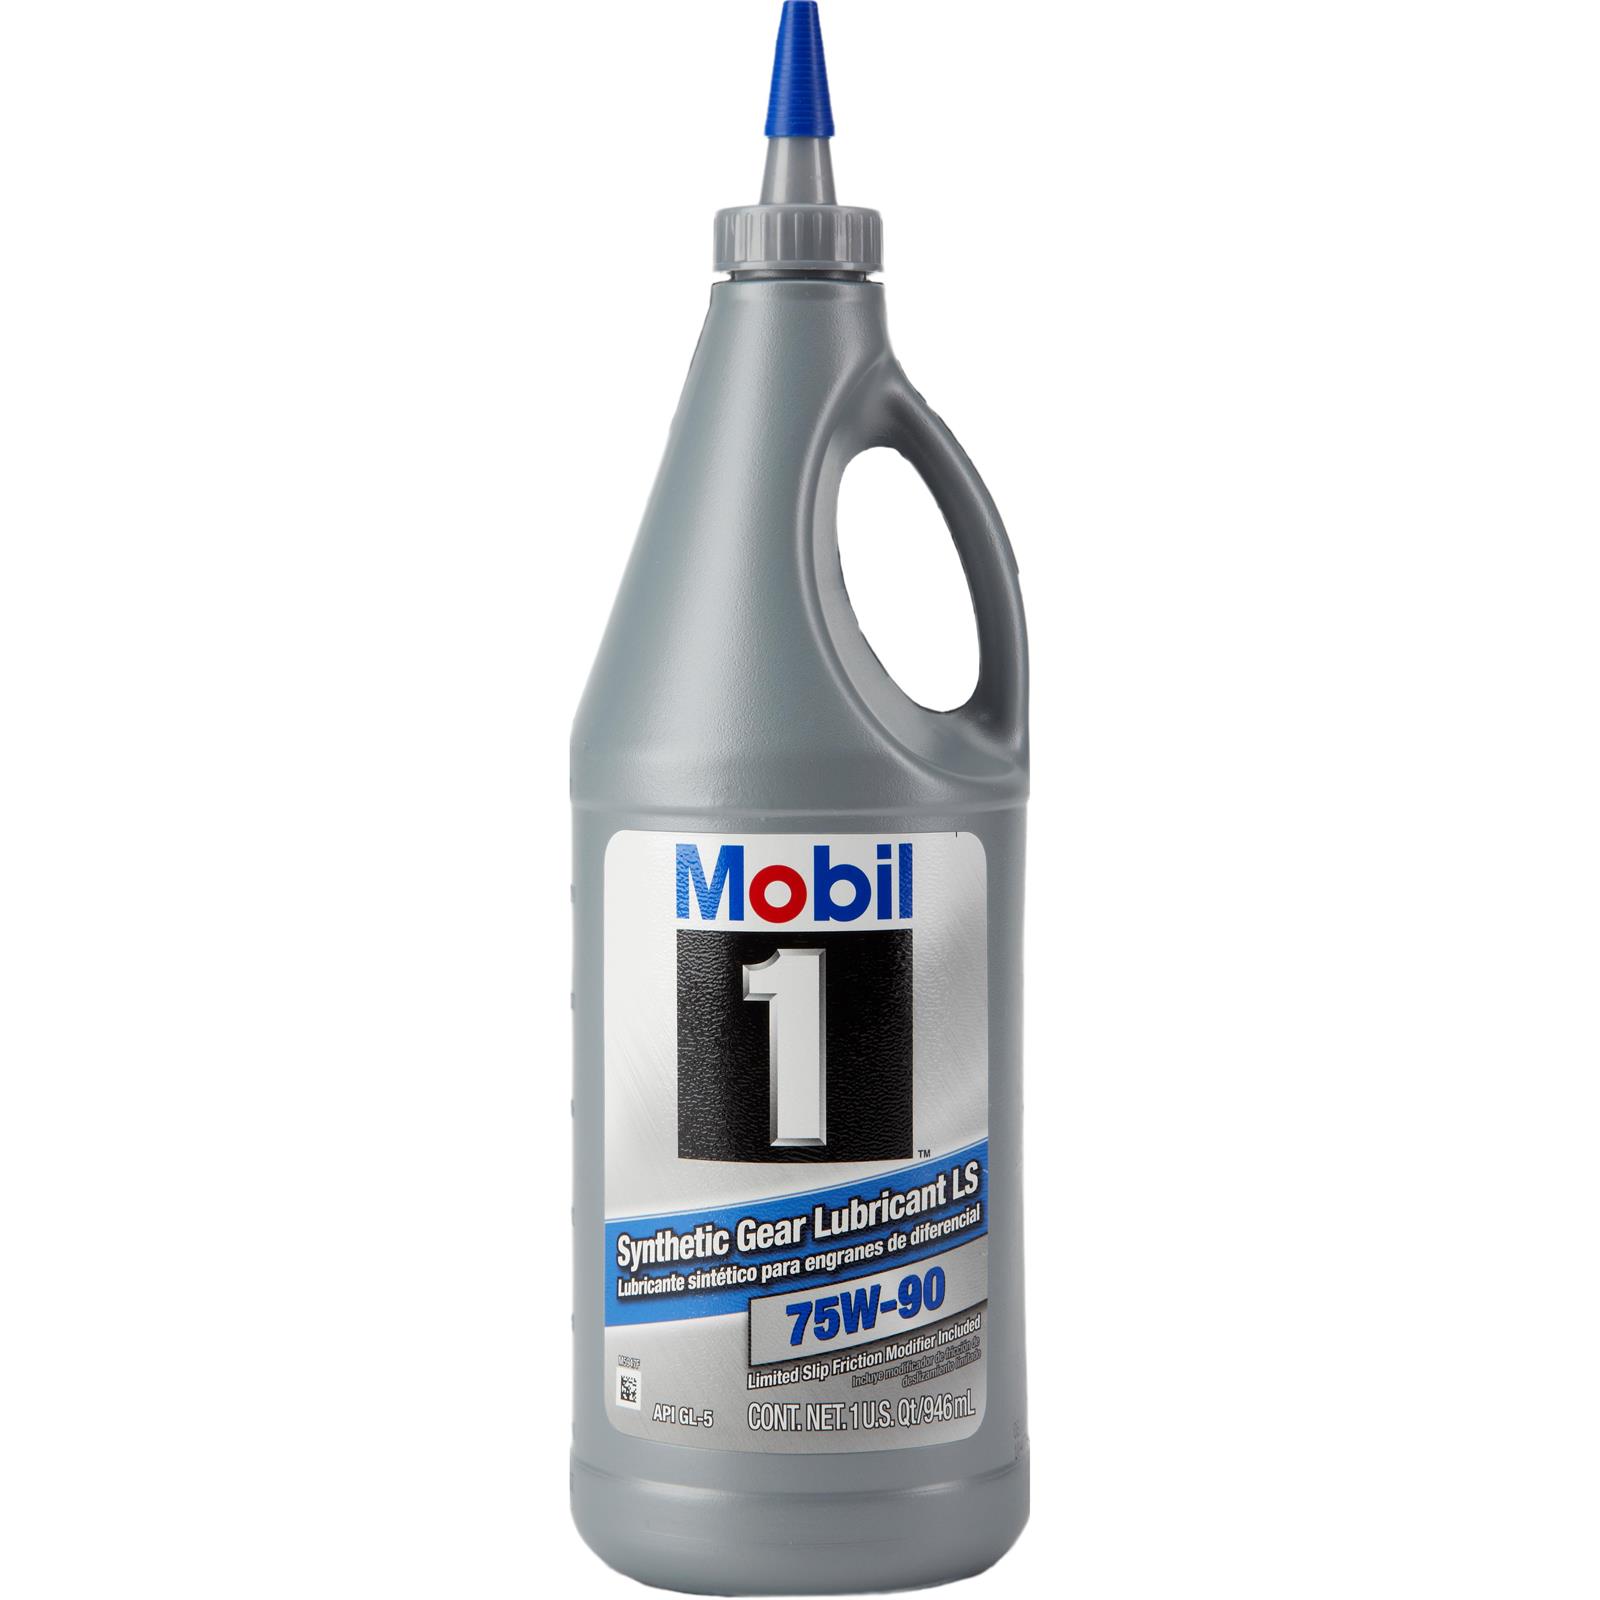 mobil-synthetic-gear-oil-75w-90-the-lubrication-store